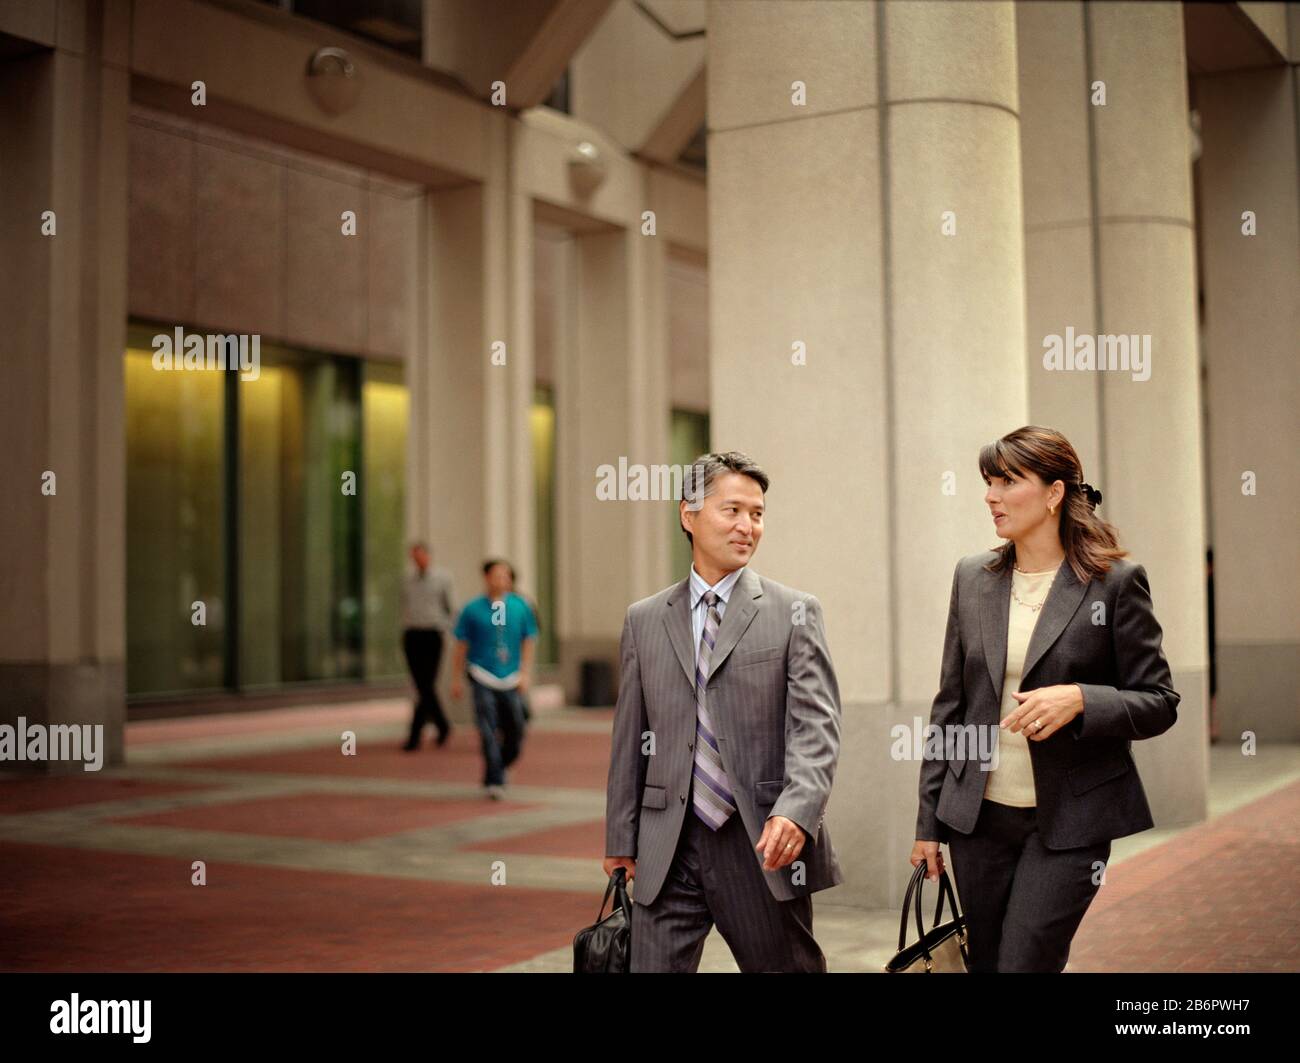 Mid-adult business woman walking on the street with a mid-adult male colleague. Stock Photo